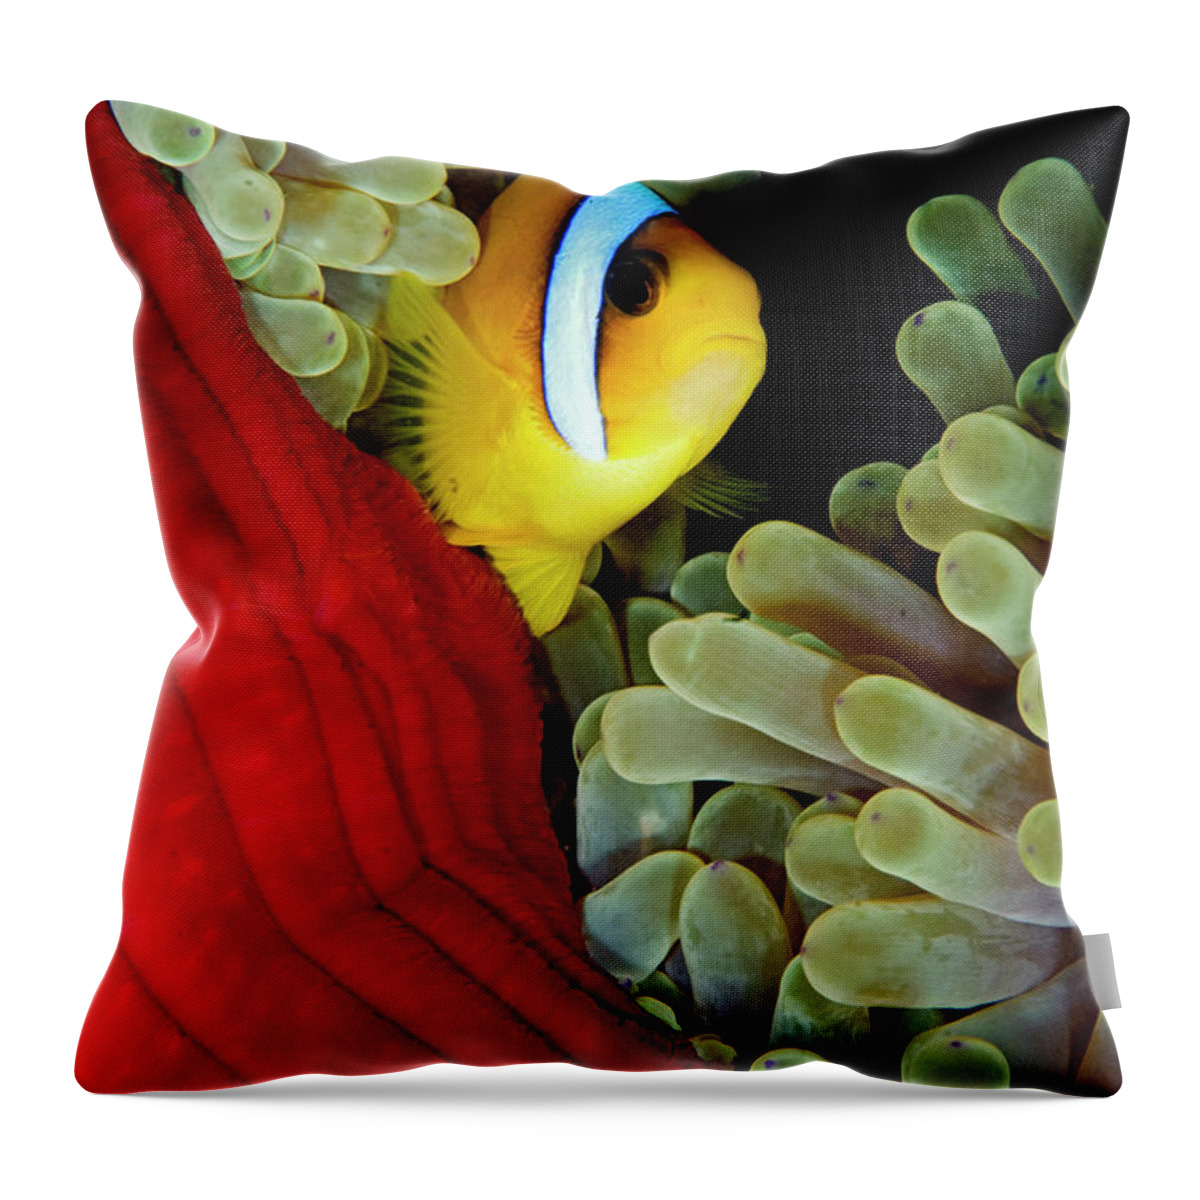 70027140 Throw Pillow featuring the photograph Two-banded Anemonefish by Dray van Beeck